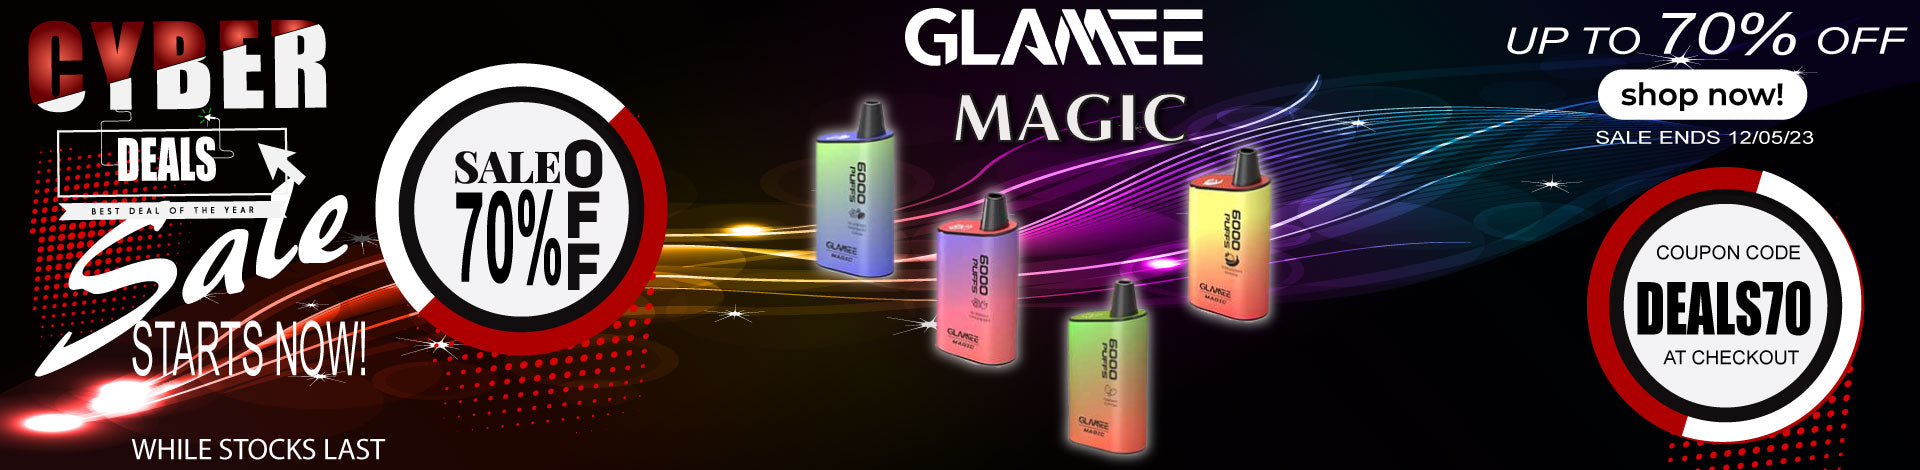 Black Friday Cyber Monday Deals Glamee Magic Save 70% Off Now